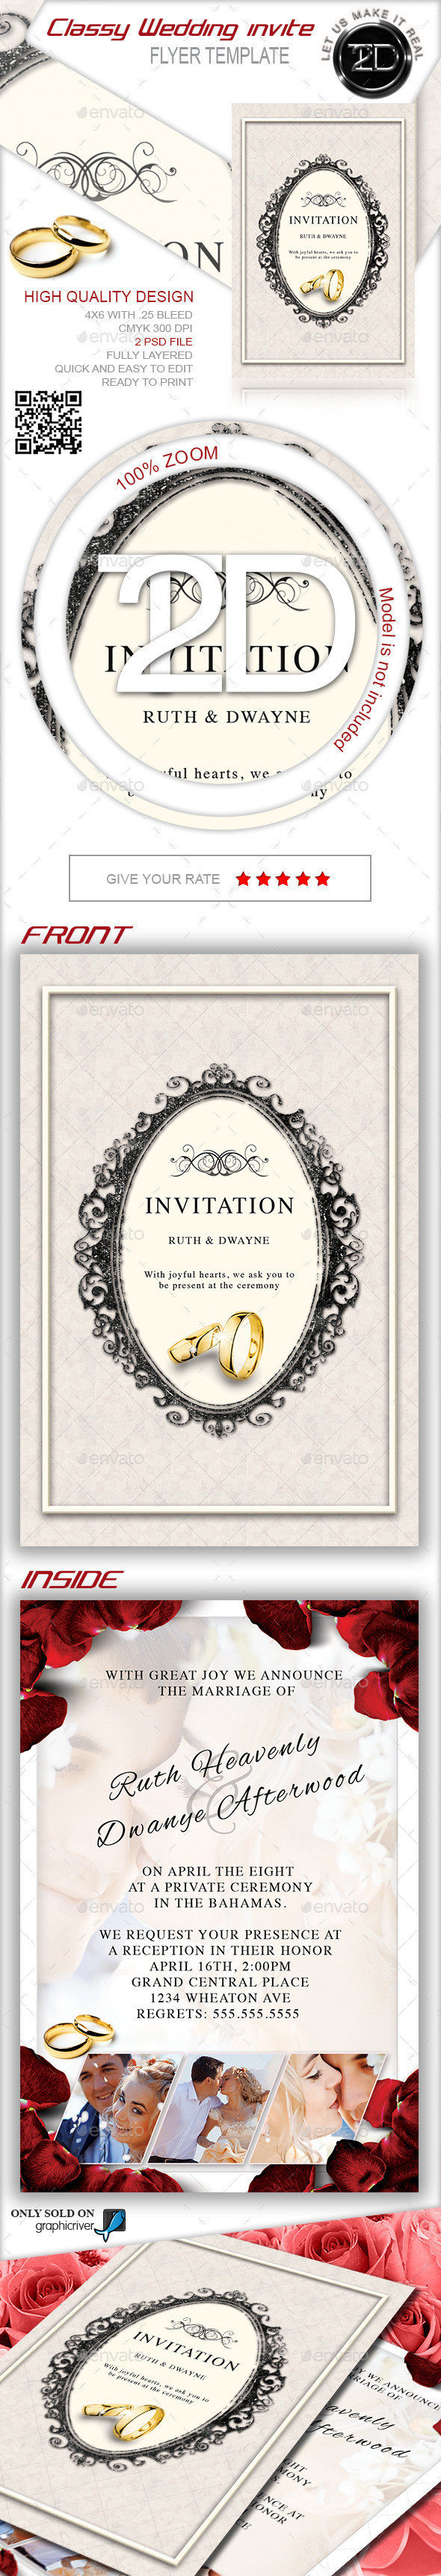 Preview 20  20classy 20wedding 20invite flyer 20template 20 design 20by 20take2design 